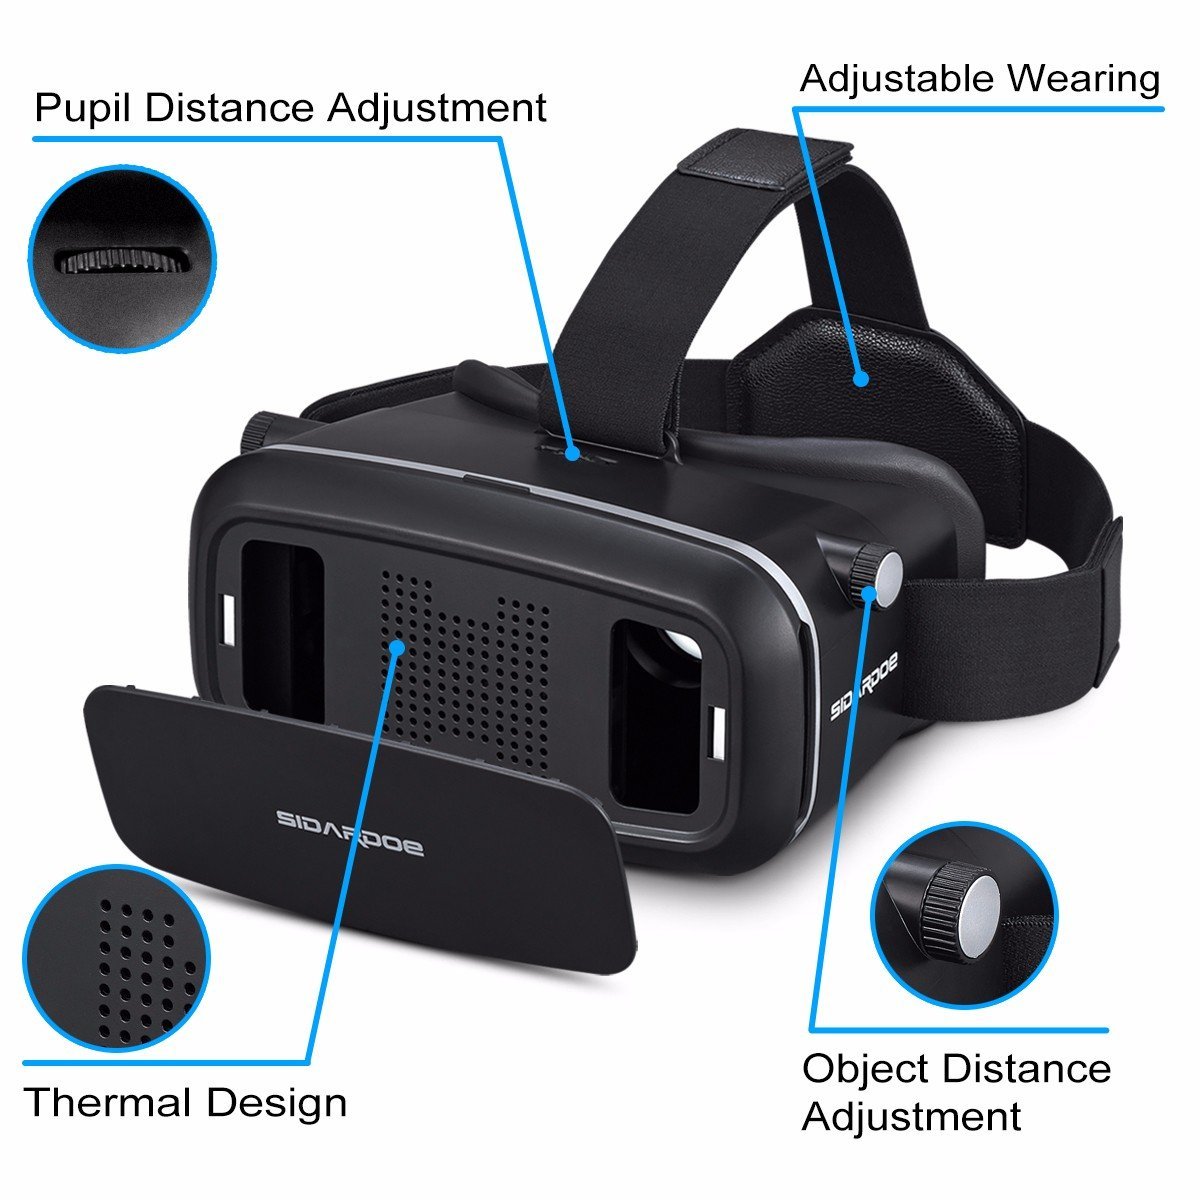 Lightweight VR Headset VR 3D Virtual Reality Headset for Movies and Games VR Glasses Goggles Compatible with iPhone & Android Phone Adjustable Pupil & Object Distance 2K Anti-Blue Lenses 